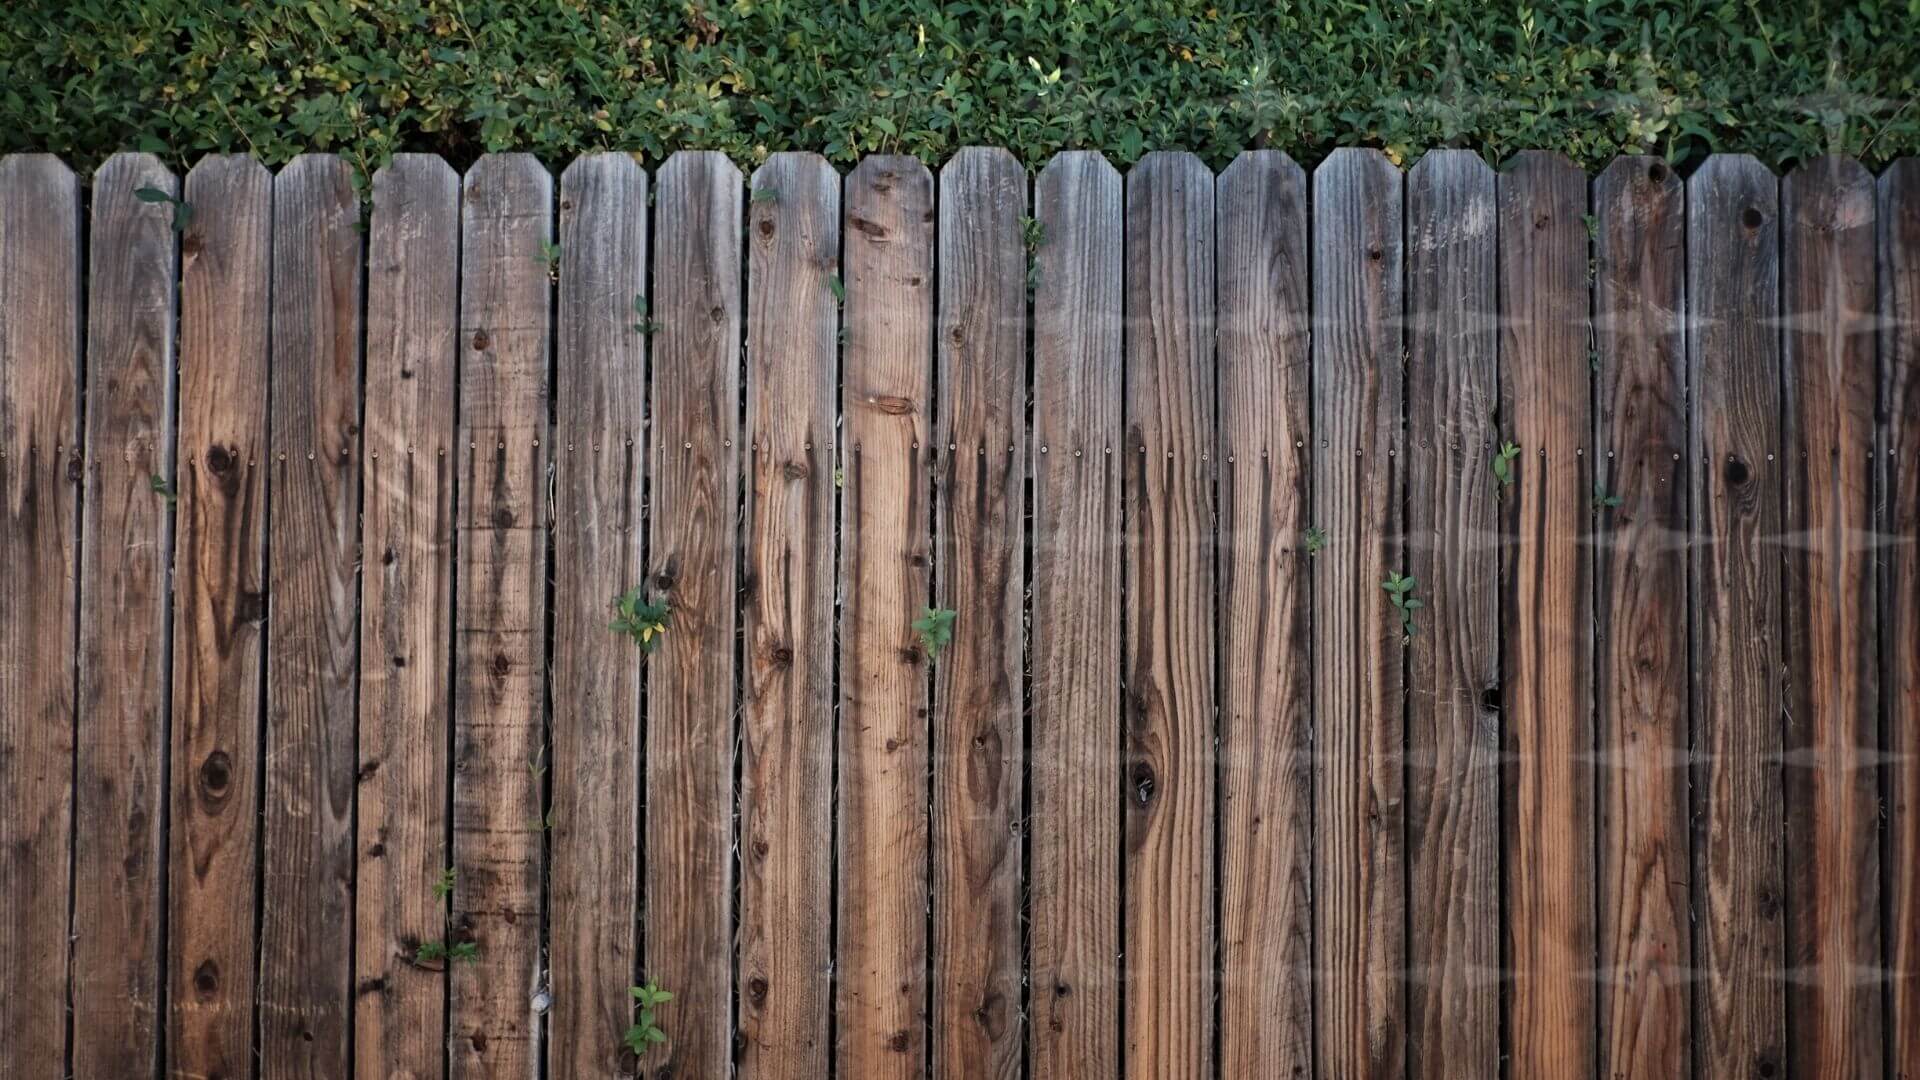 A wooden fence representing a boundary.